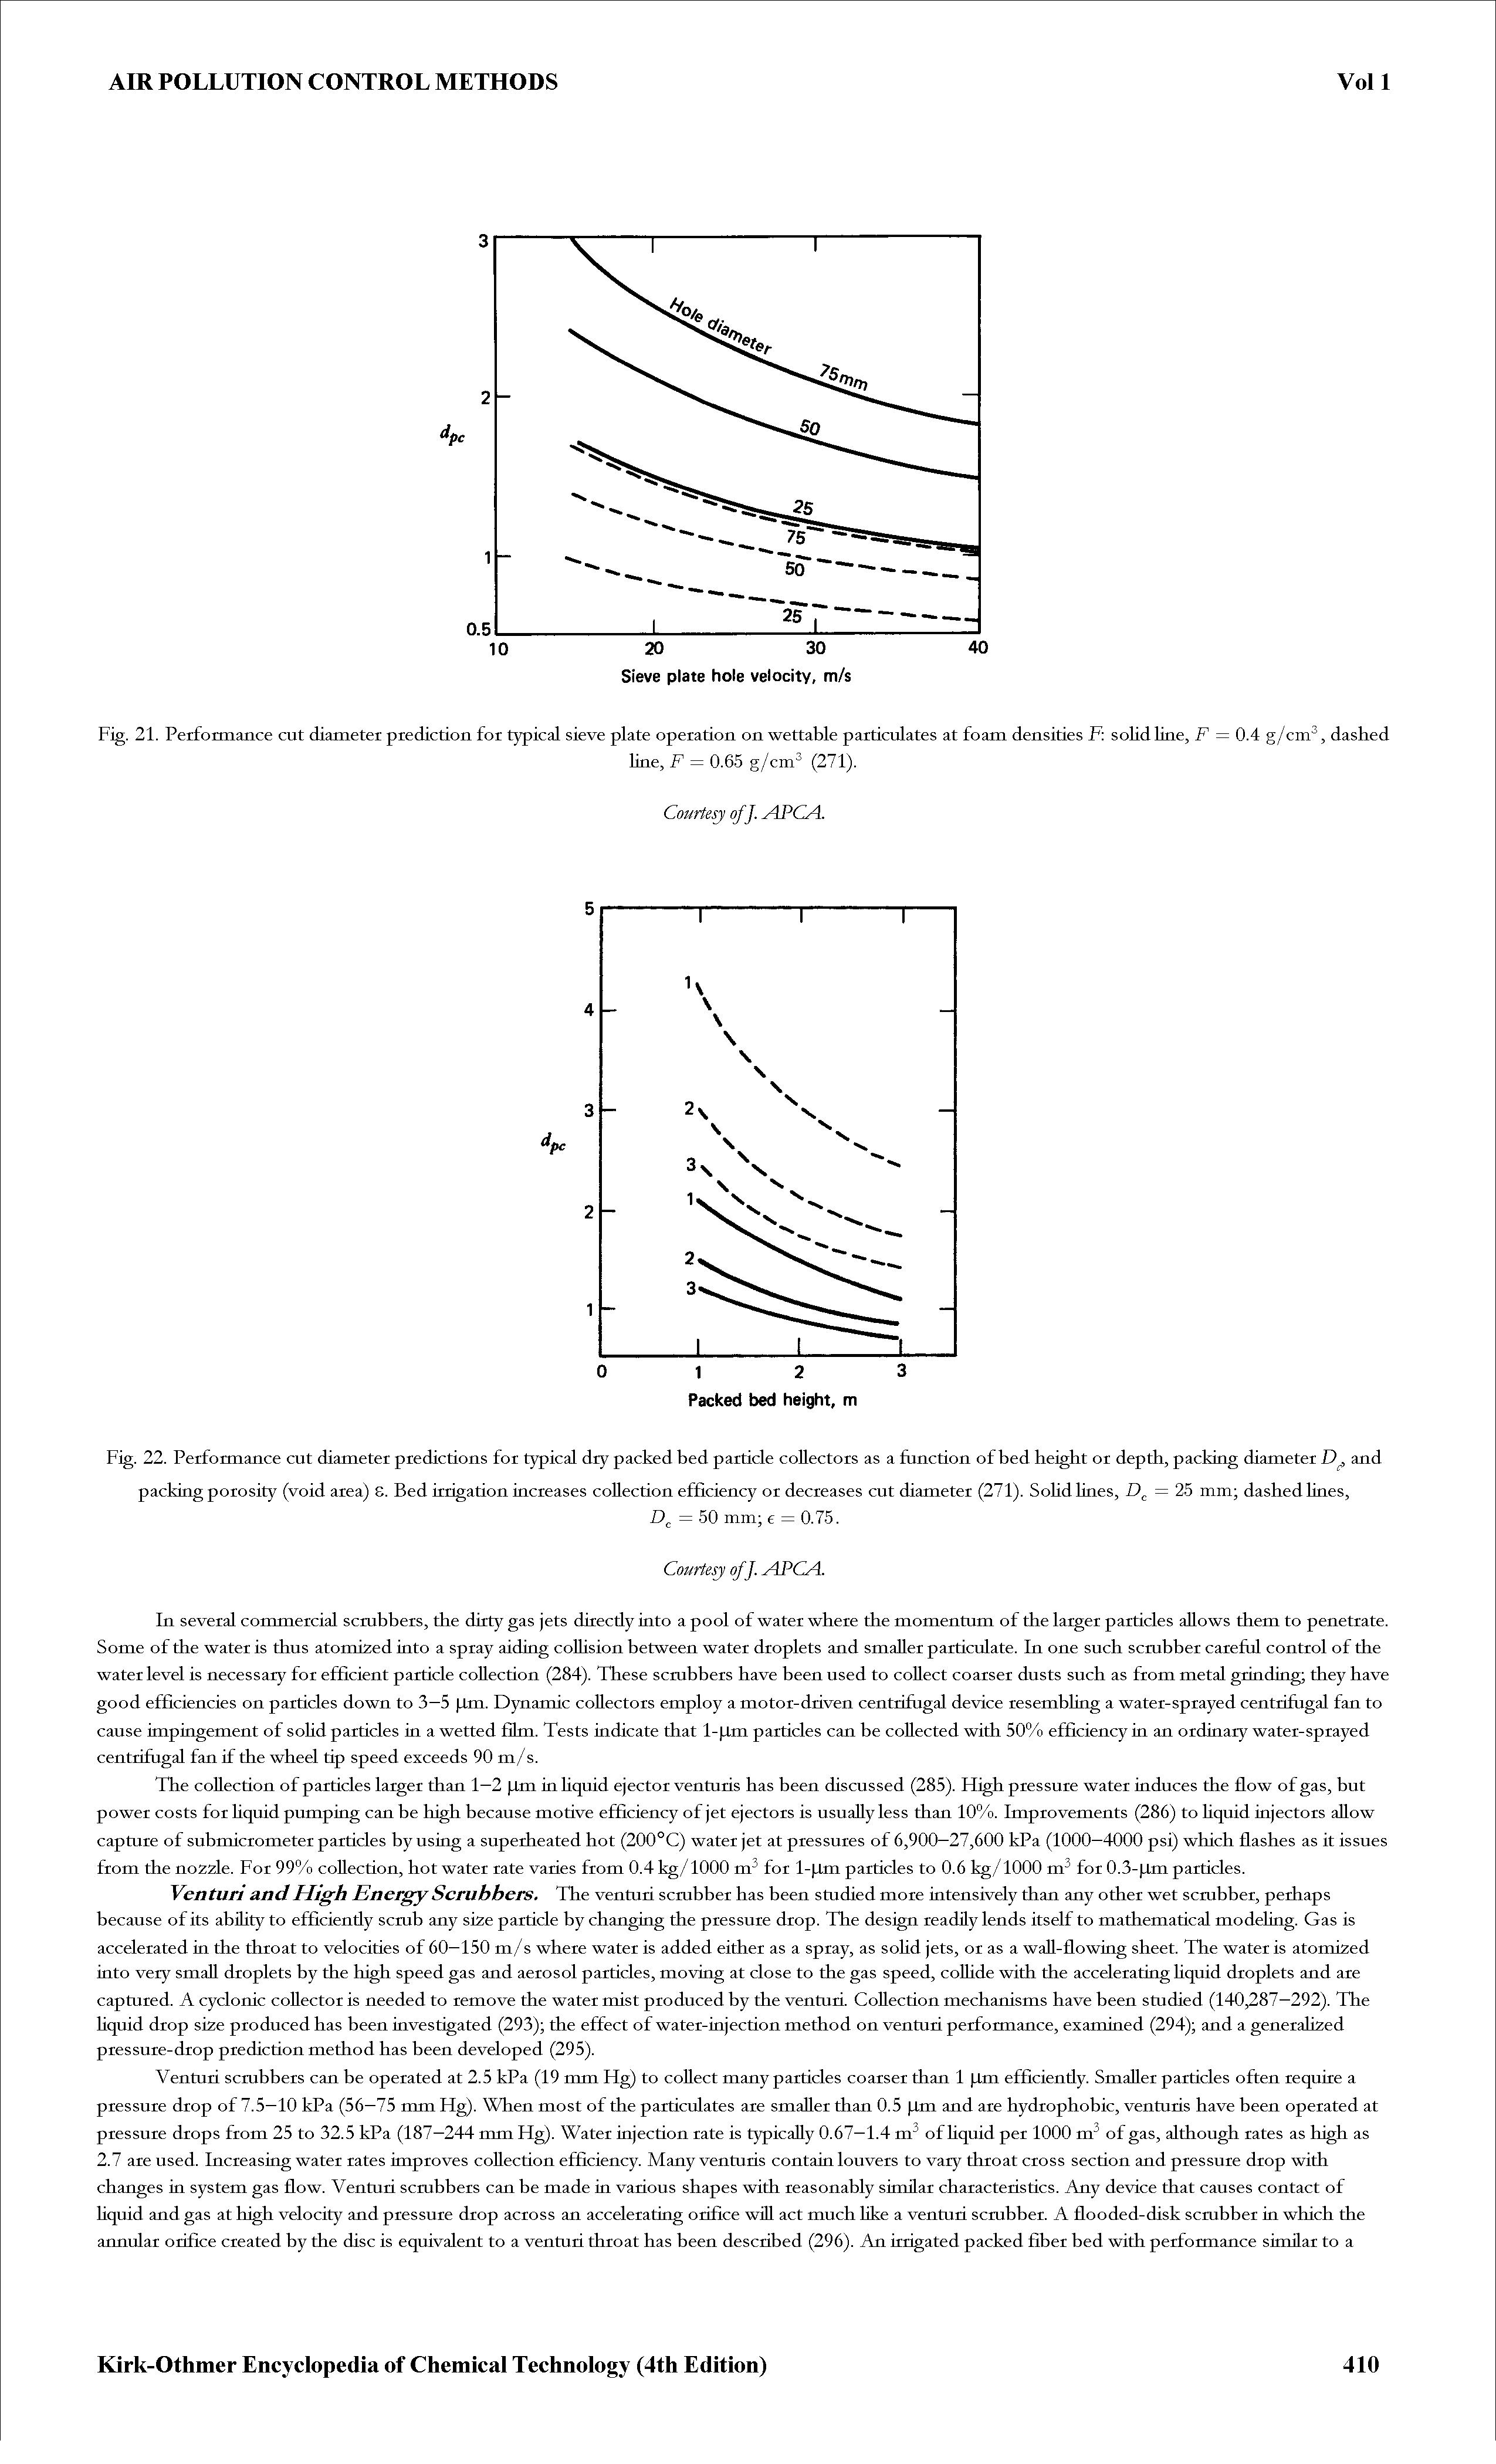 Fig. 22. Performance cut diameter predictions for typical dry packed bed particle collectors as a function of bed height or depth, packing diameter and packing porosity (void area) S. Bed irrigation increases collection efficiency or decreases cut diameter (271). SoHd lines, = 25 mm dashed lines,...